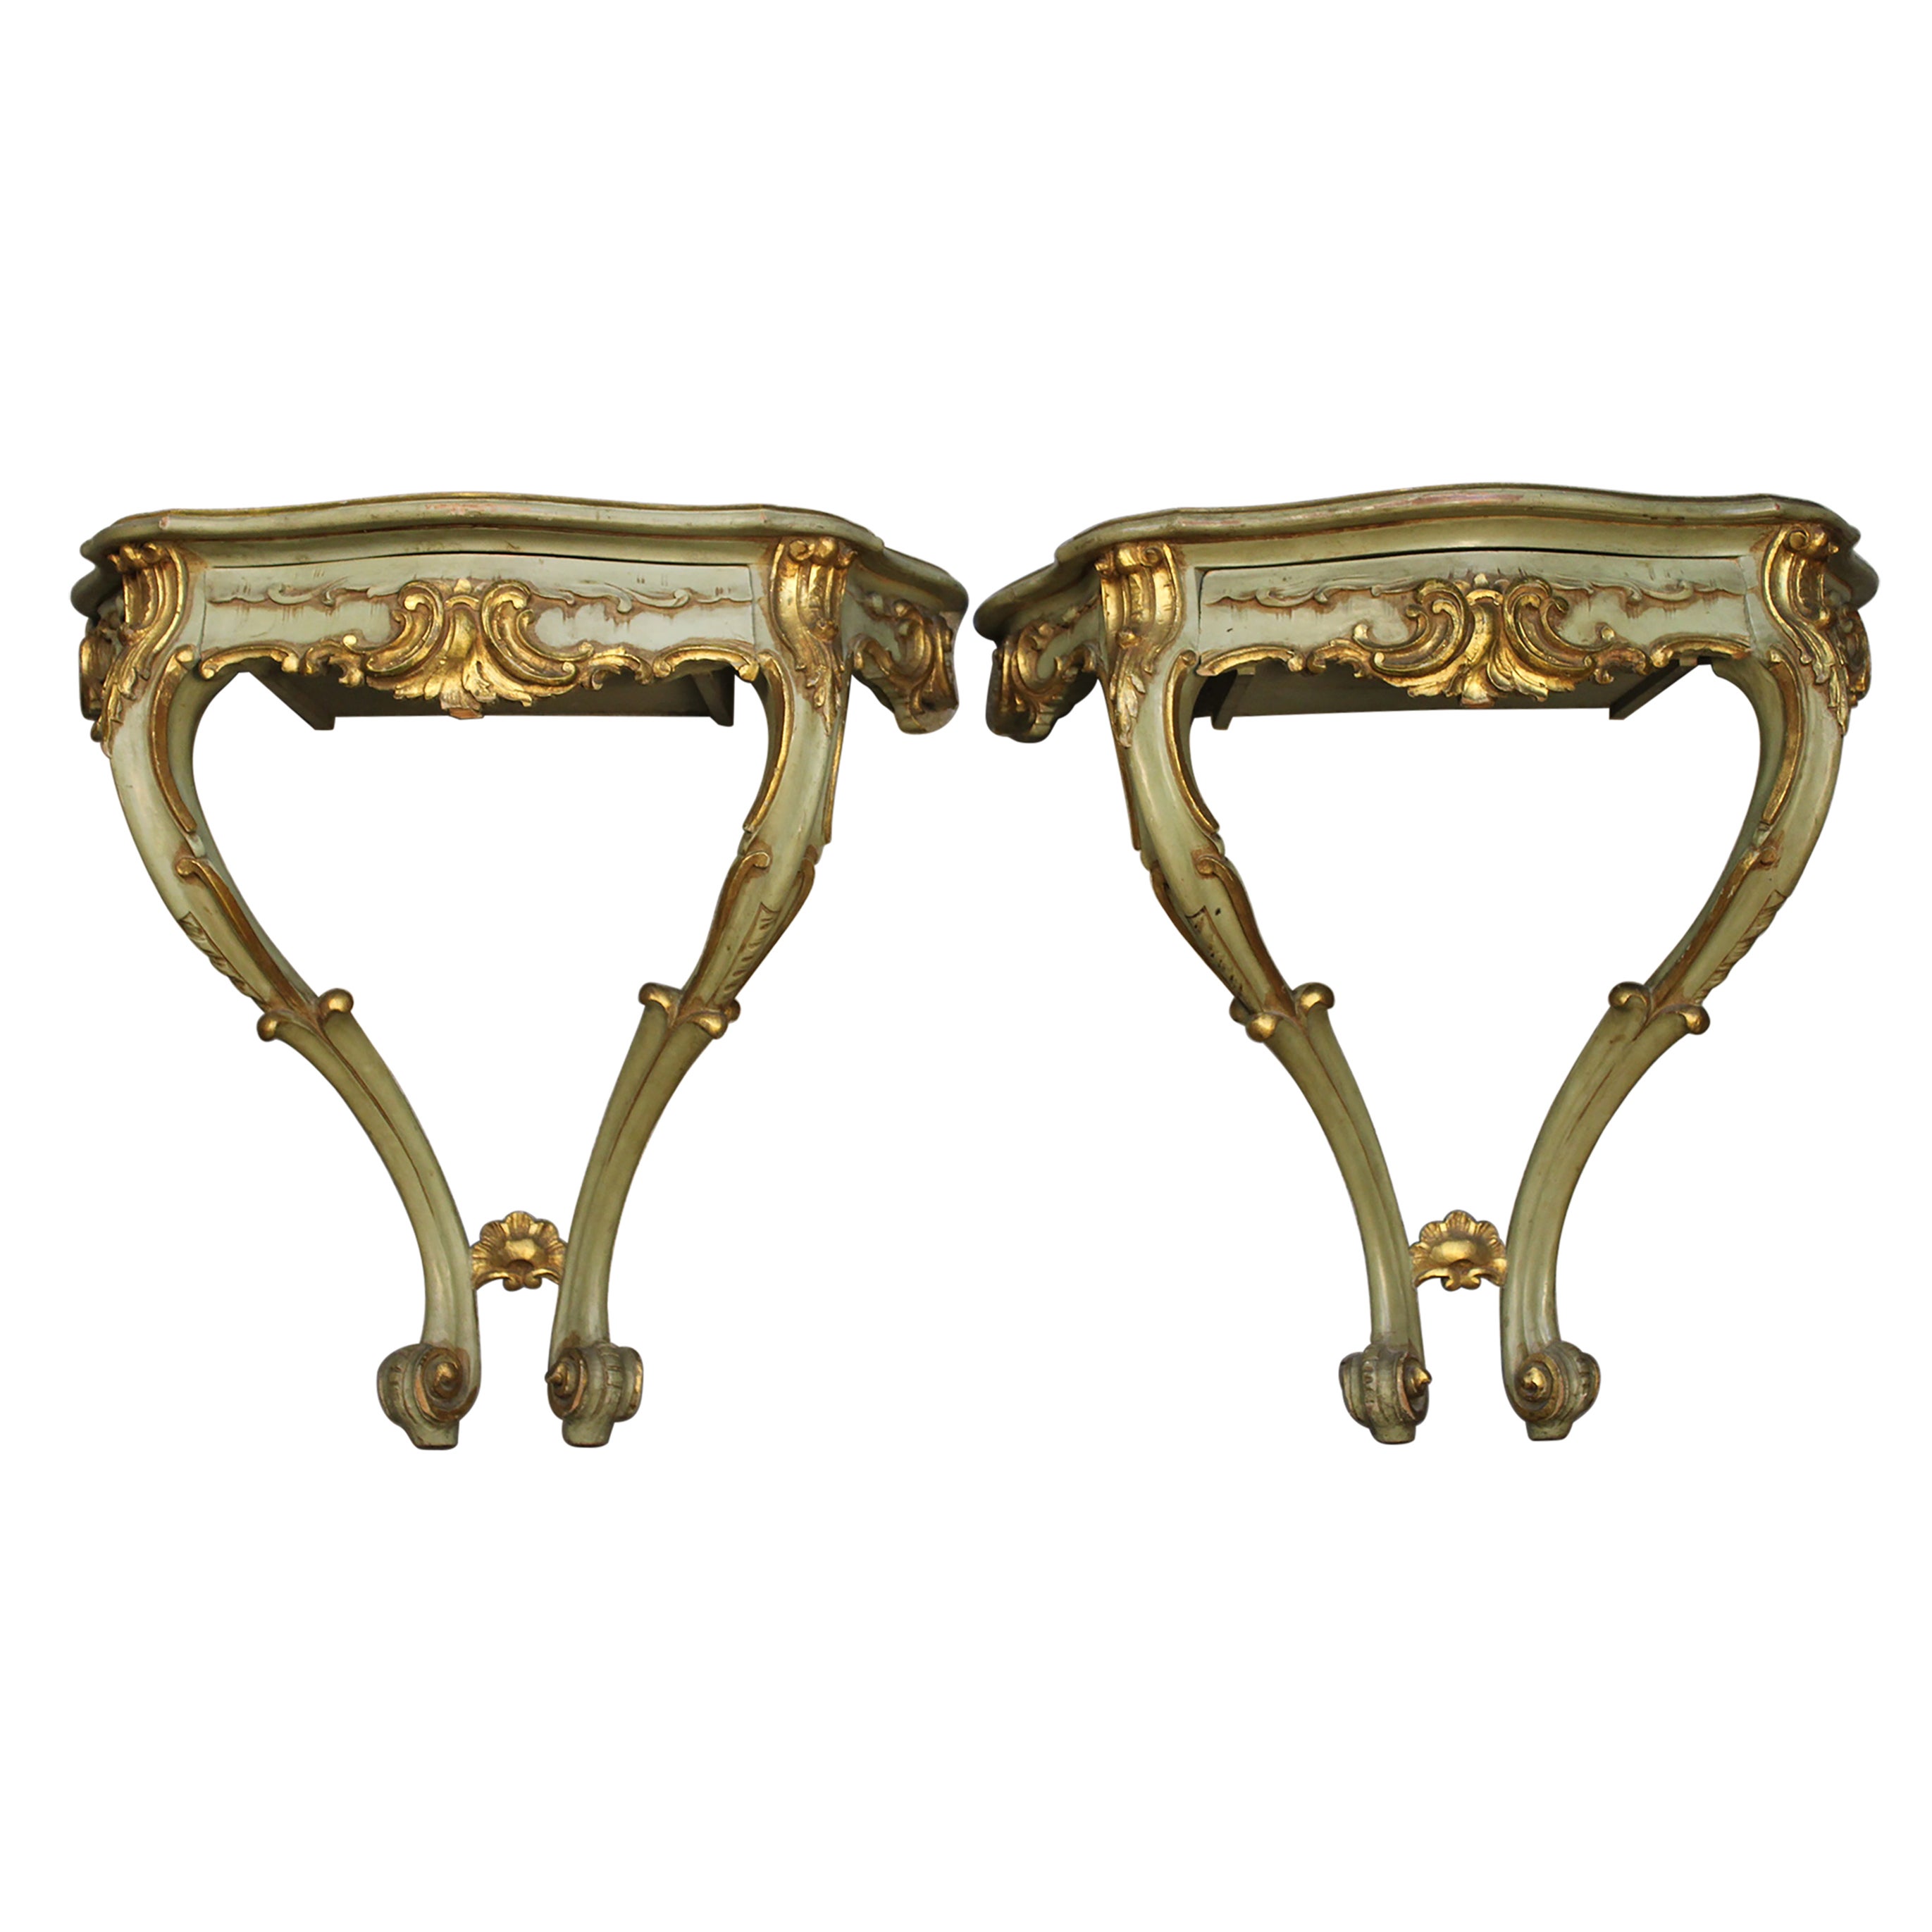 Pair of Venetian Gilded Console Tables circa 1870 Italy